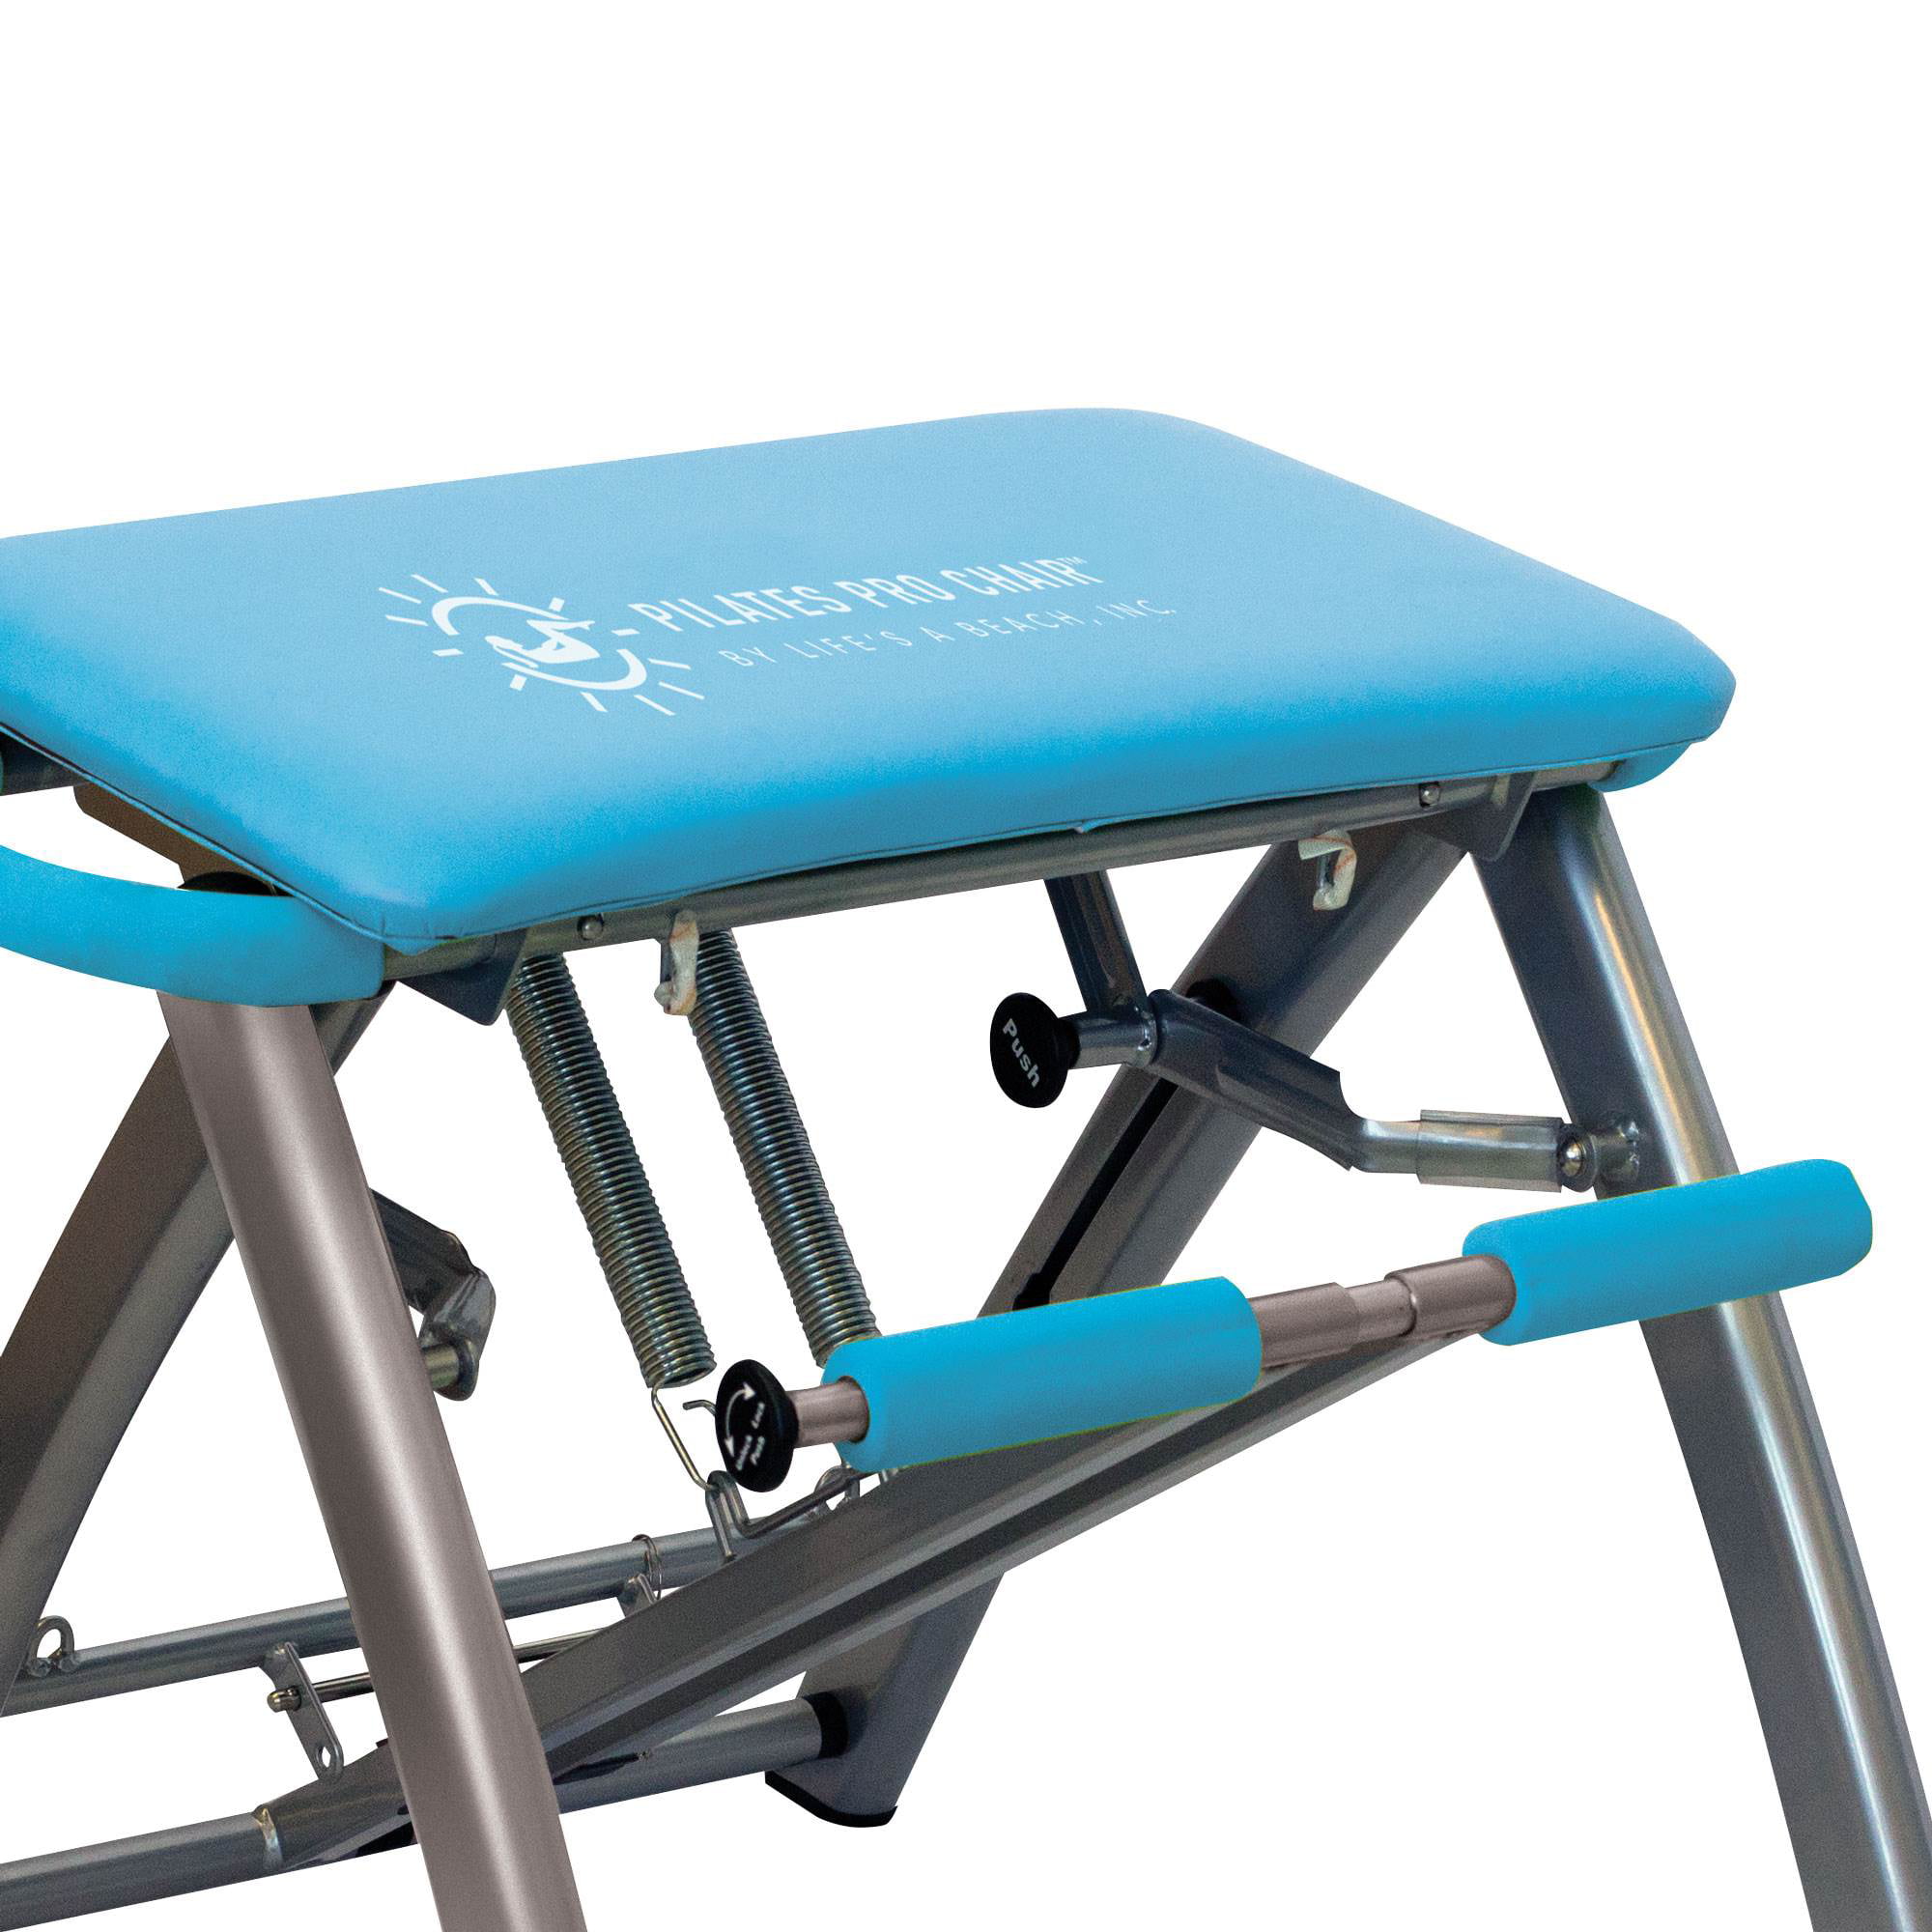 Details about   New Life’s A Beach Aqua Blue Teal Pilates PRO Exercise Workout Chair with 4 DVDs 